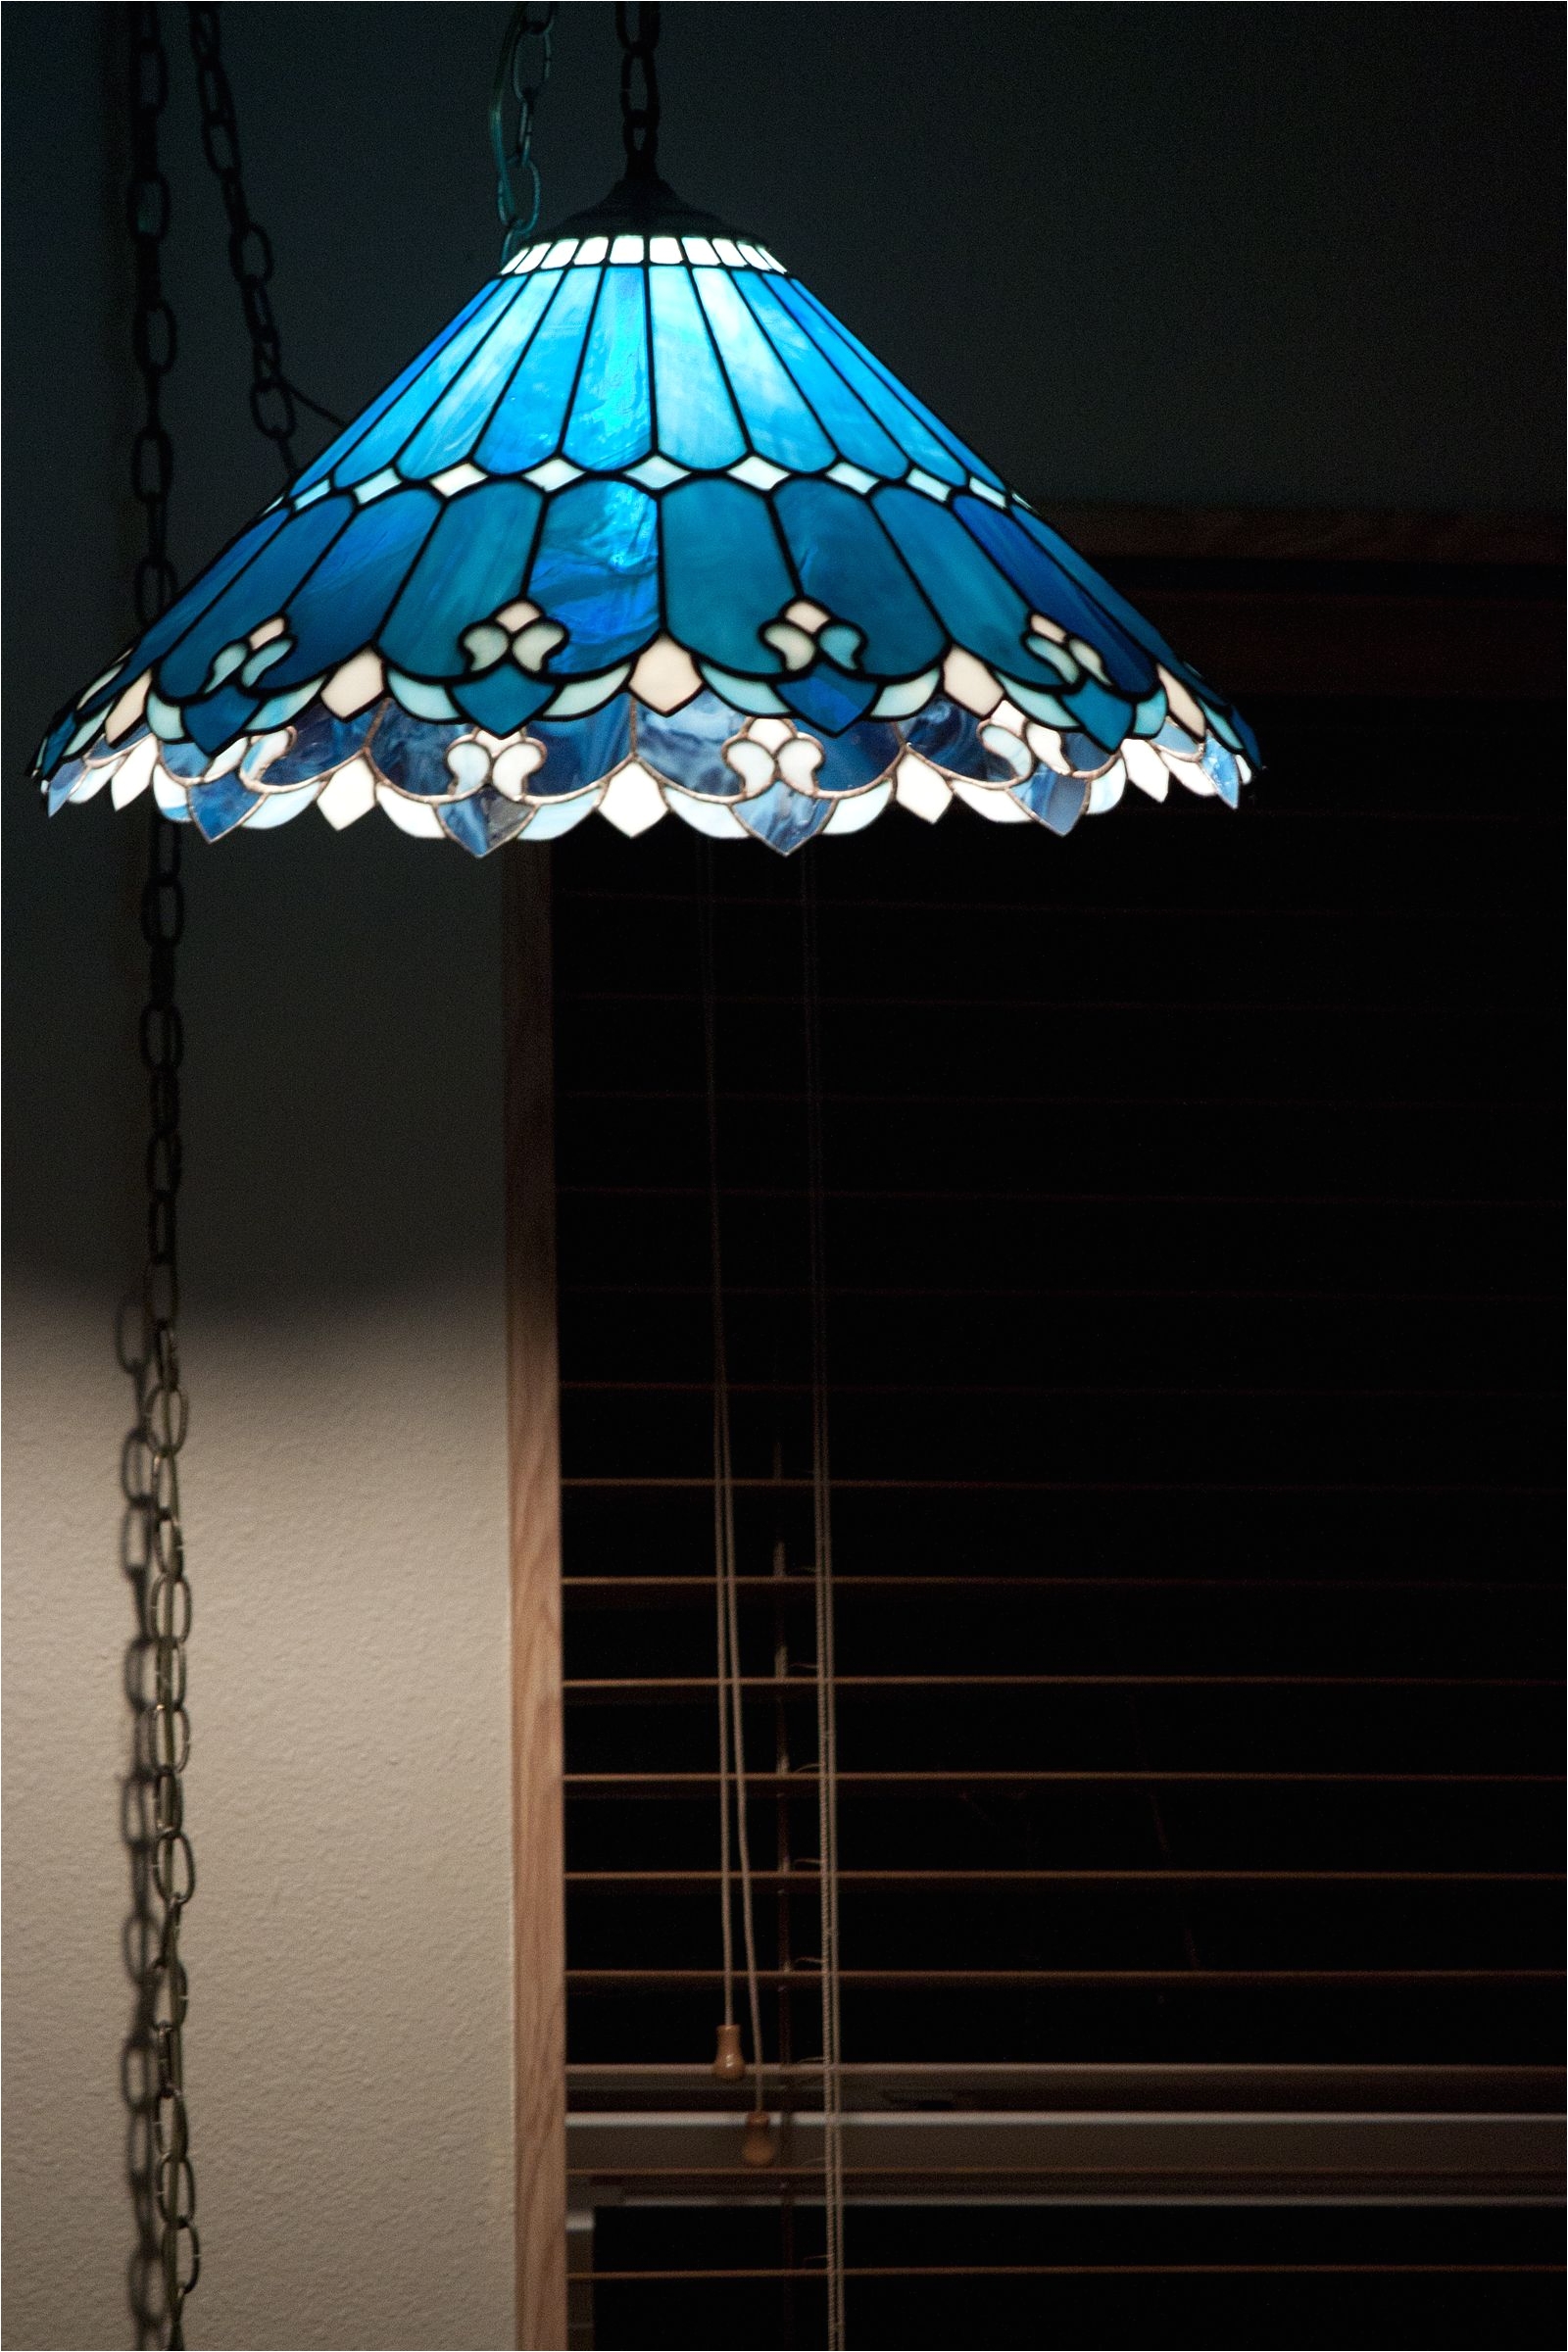 Used Stained Glass Lamps for Sale Day 41 Tiffany Lamp Its Apartmental My Dear Watson